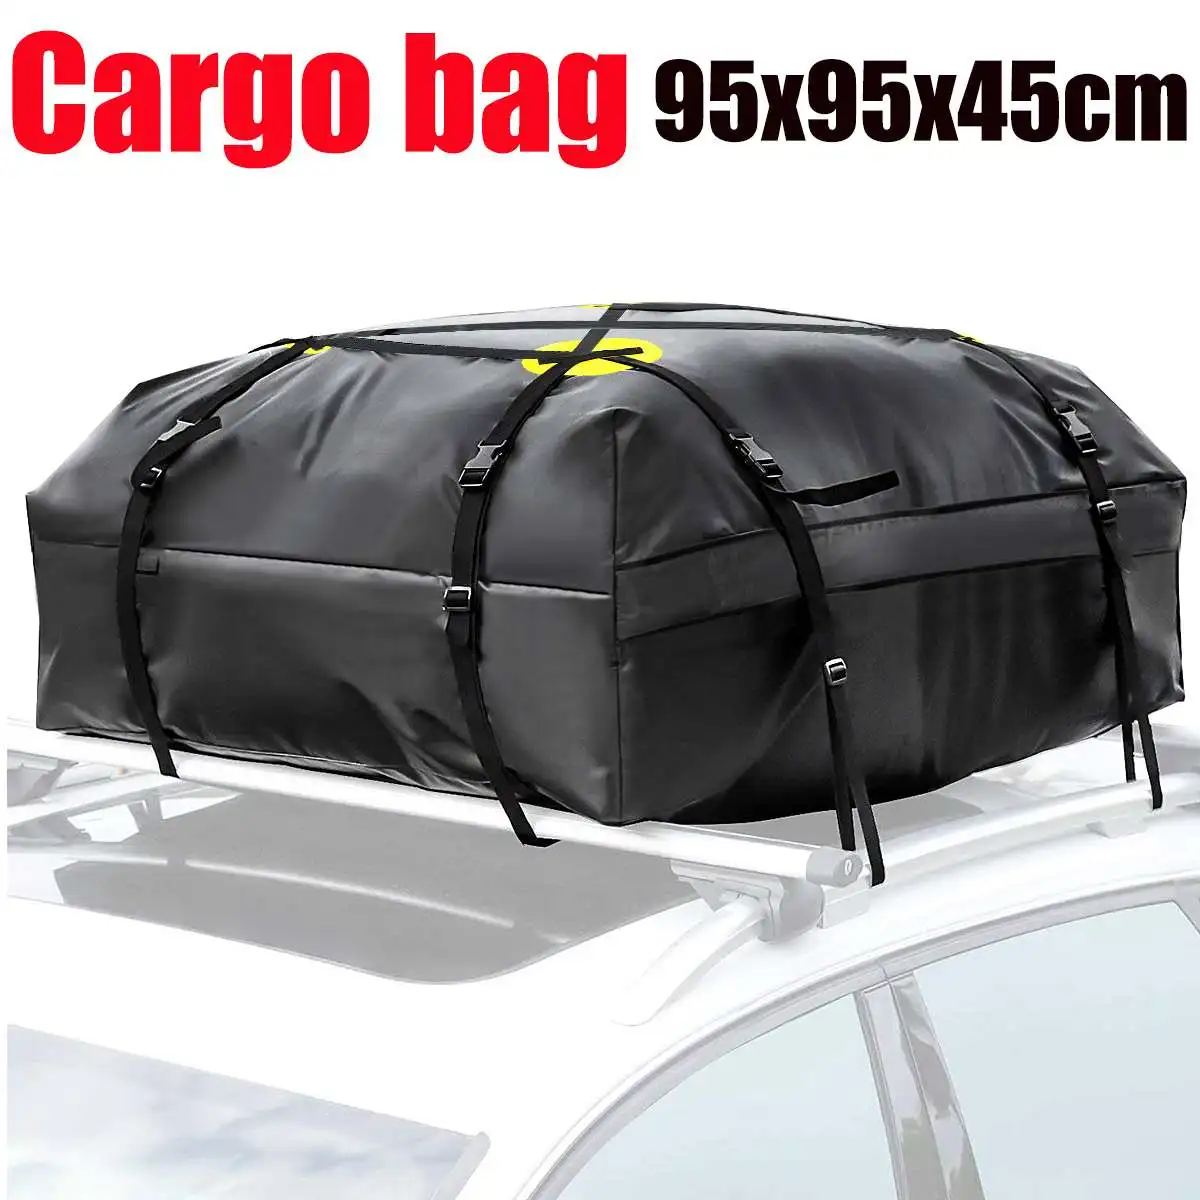 600D Waterproof Cargo Bag Car Roof Cargo Carrier Universal Luggage Bag Storage Cube Bag for Travel Camping Luggage Storage Box